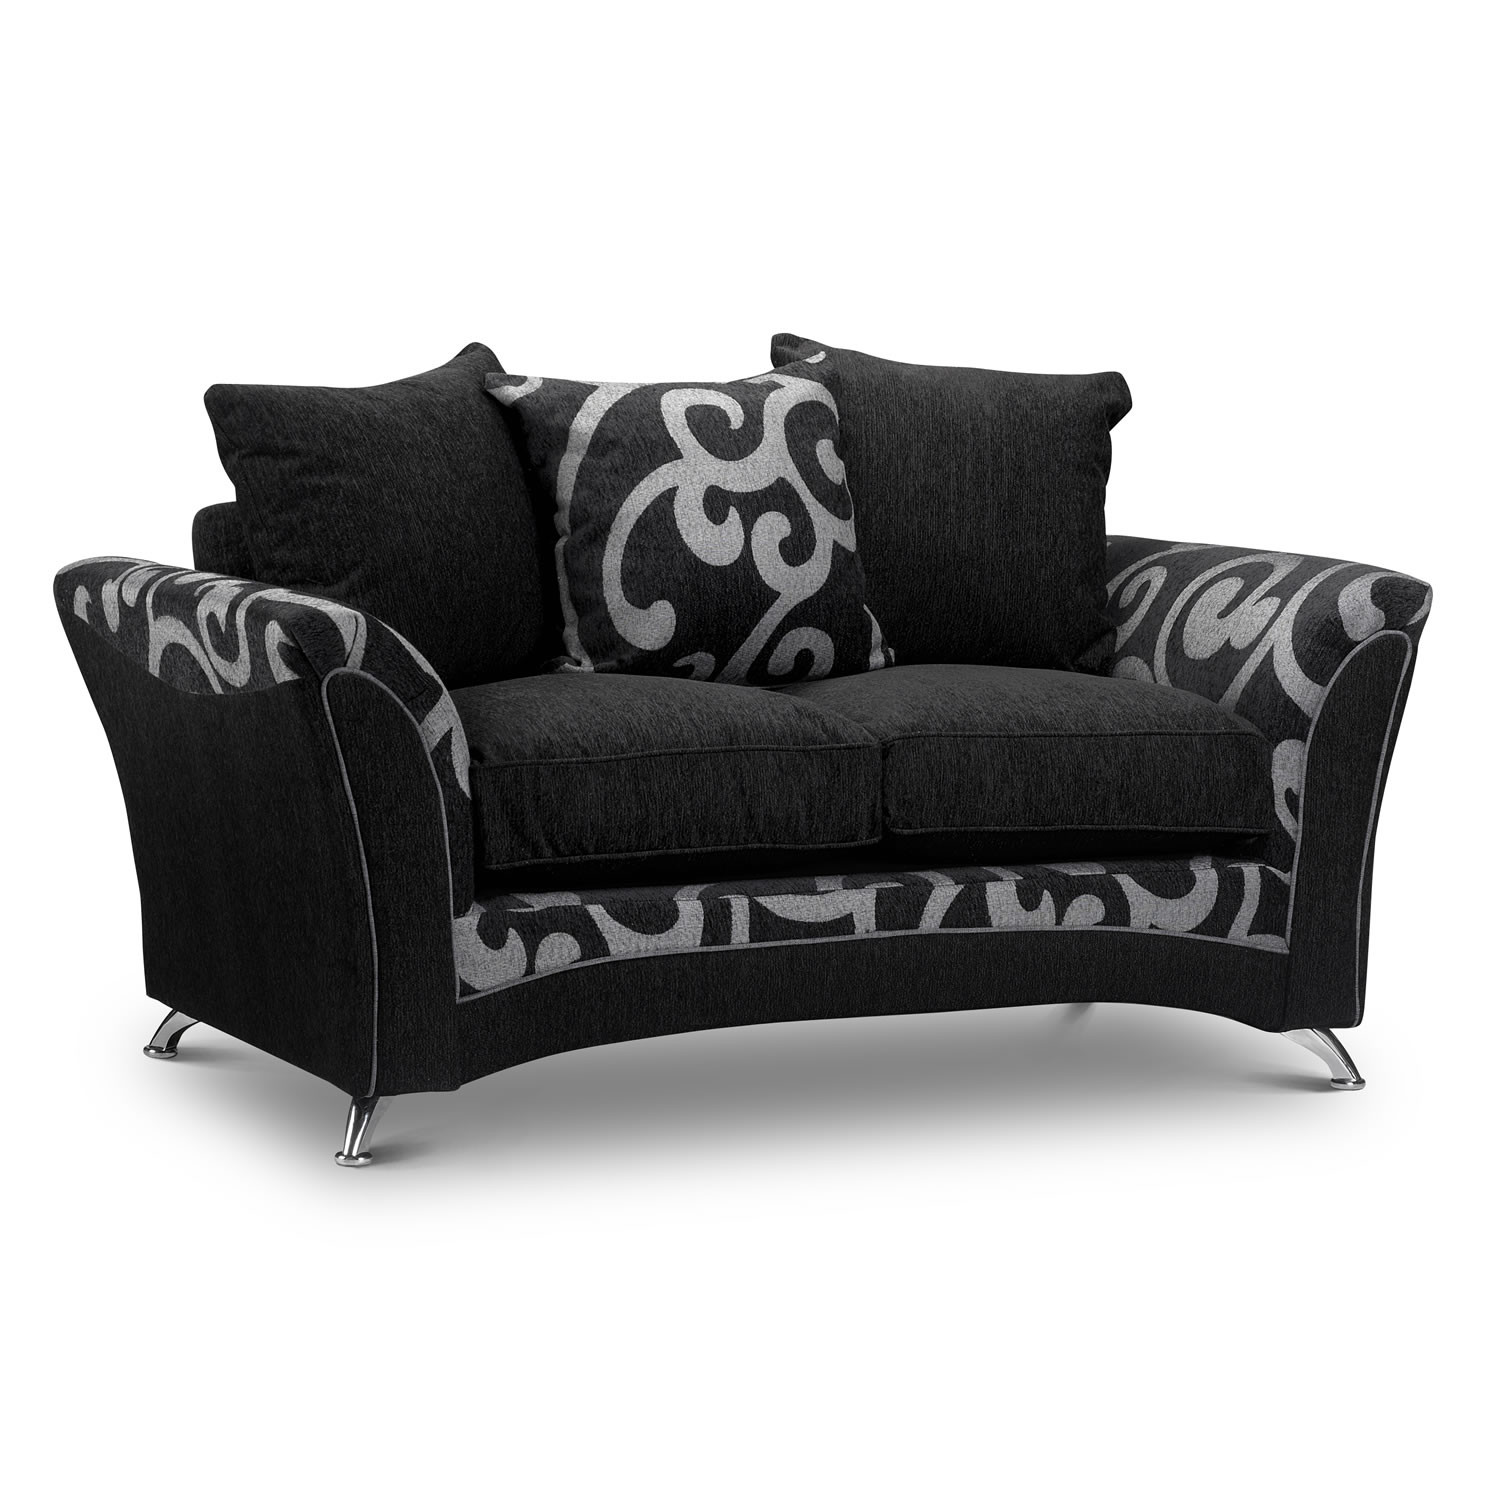 Best ideas about Pillow Back Sofa
. Save or Pin Zina 2 Seater Pillow Back Sofa – Next Day Delivery Zina 2 Now.